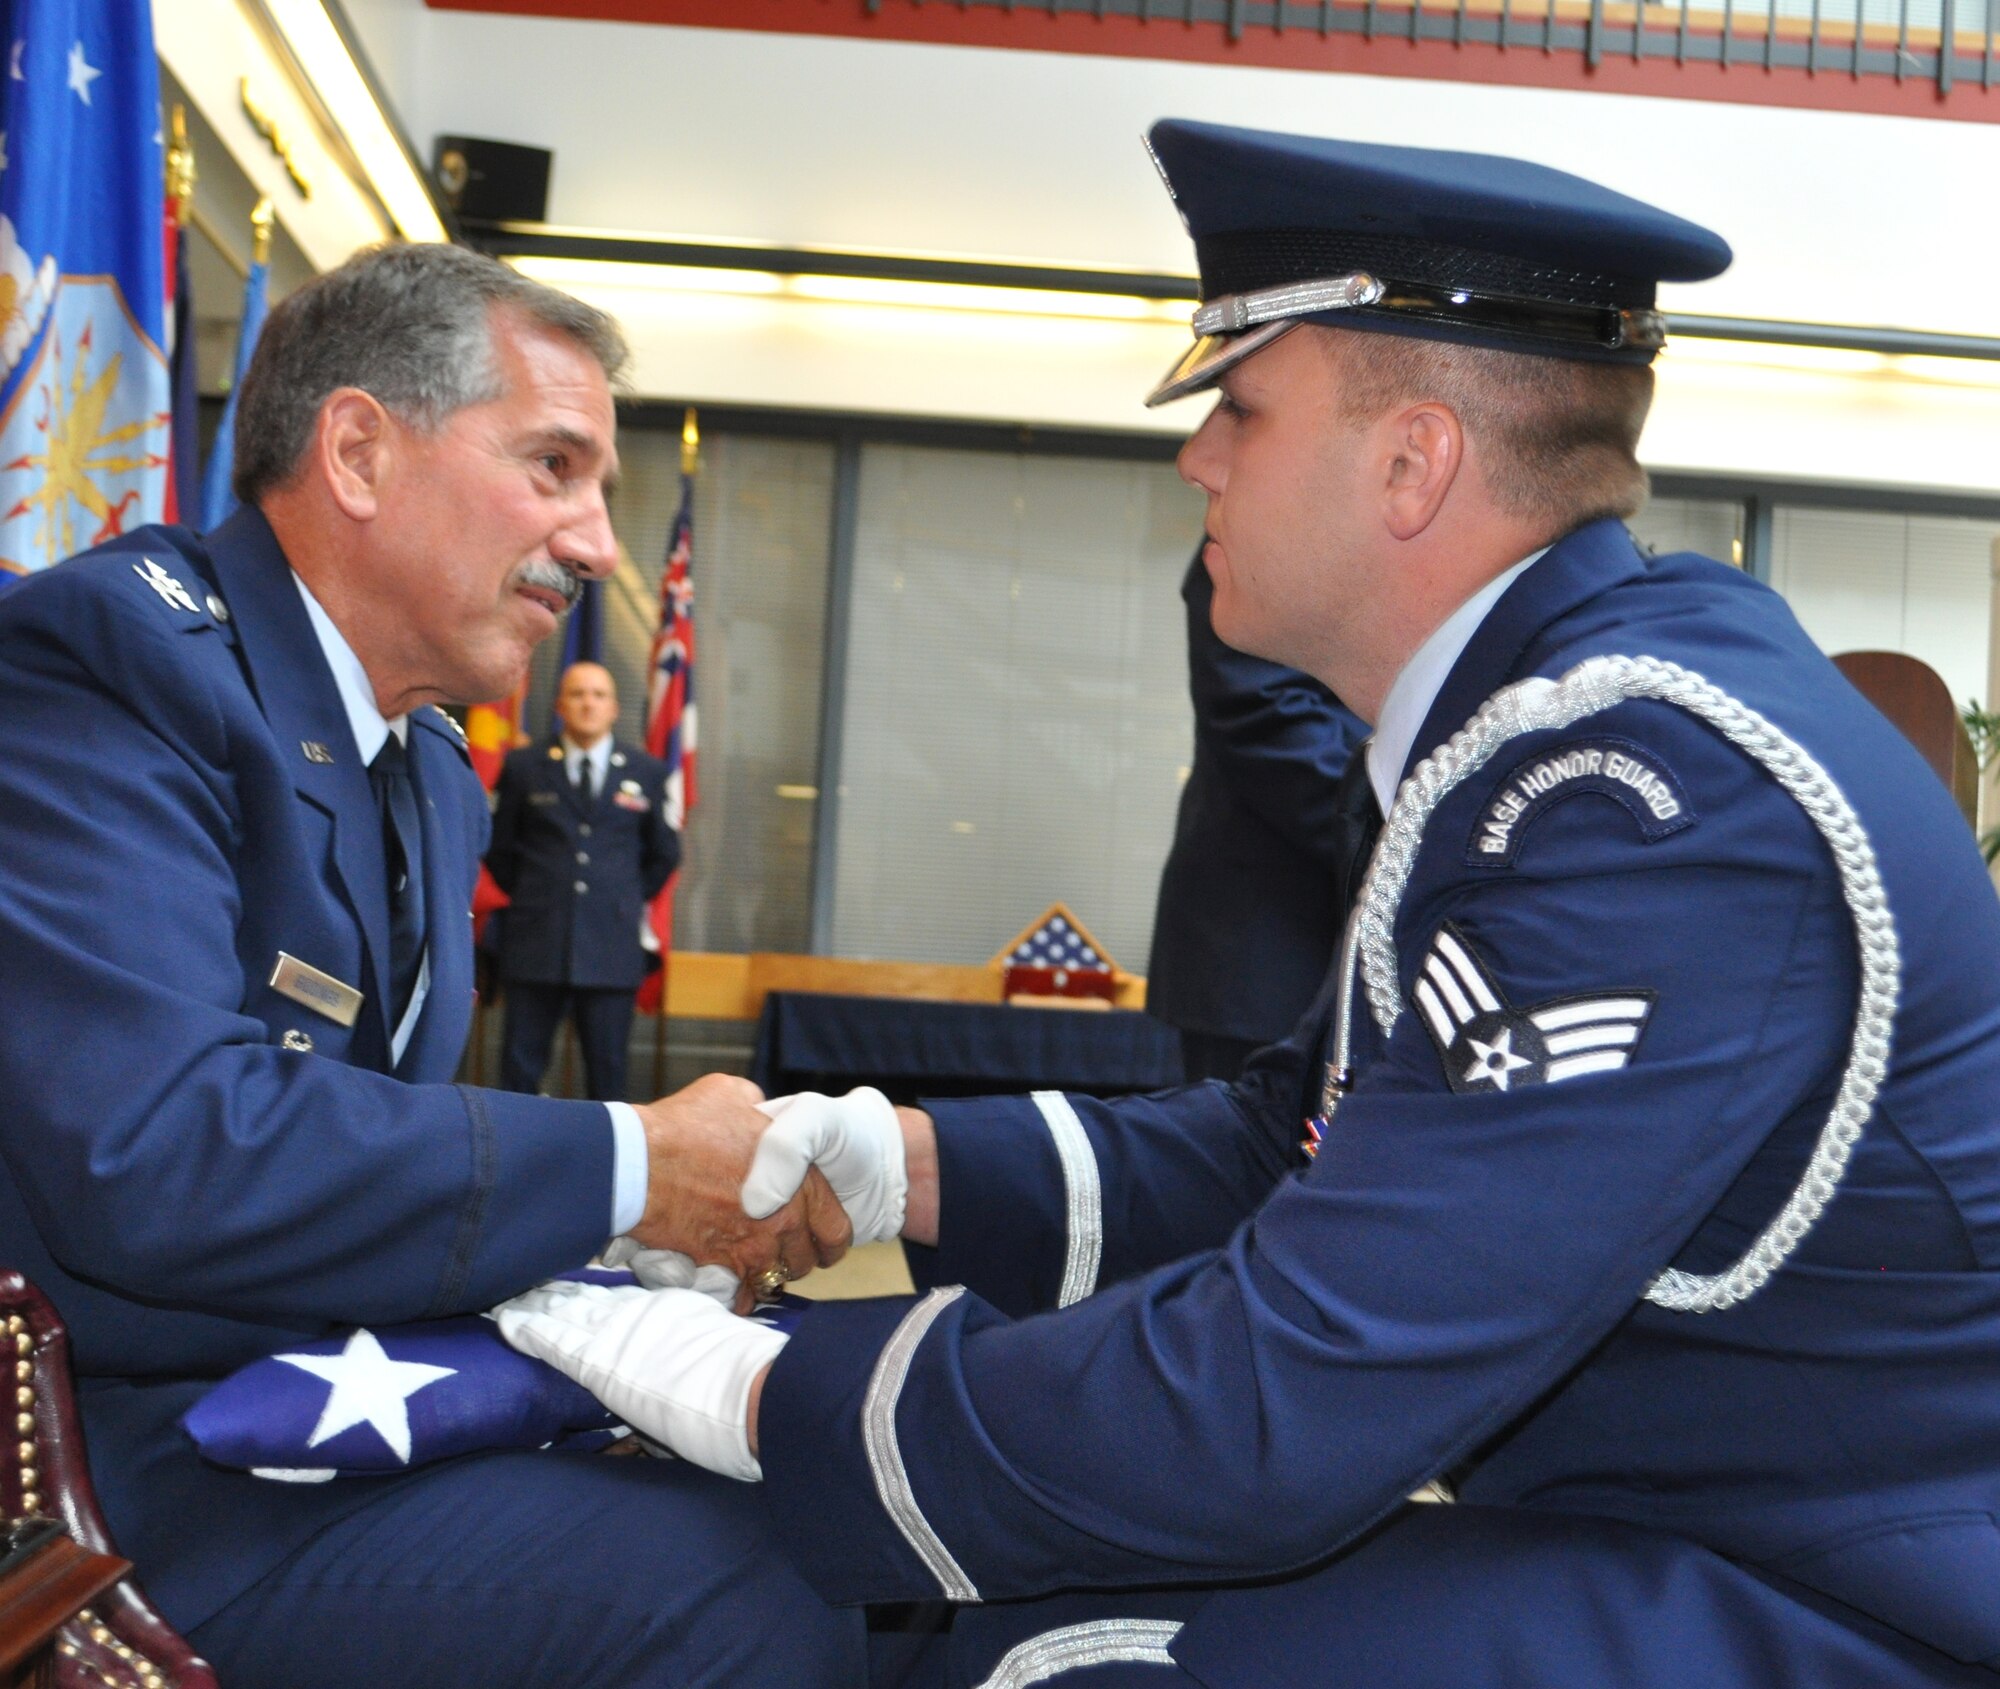 TRAVIS AIR FORCE BASE, Calif. -- Col. Melvin J. "Sonny" Giddings closed out a nearly 40-year career in service to his country June 8, 2014, at Travis Air Force Base, Calif. (U. S. Air Force photo / Ellen Hatfield) 